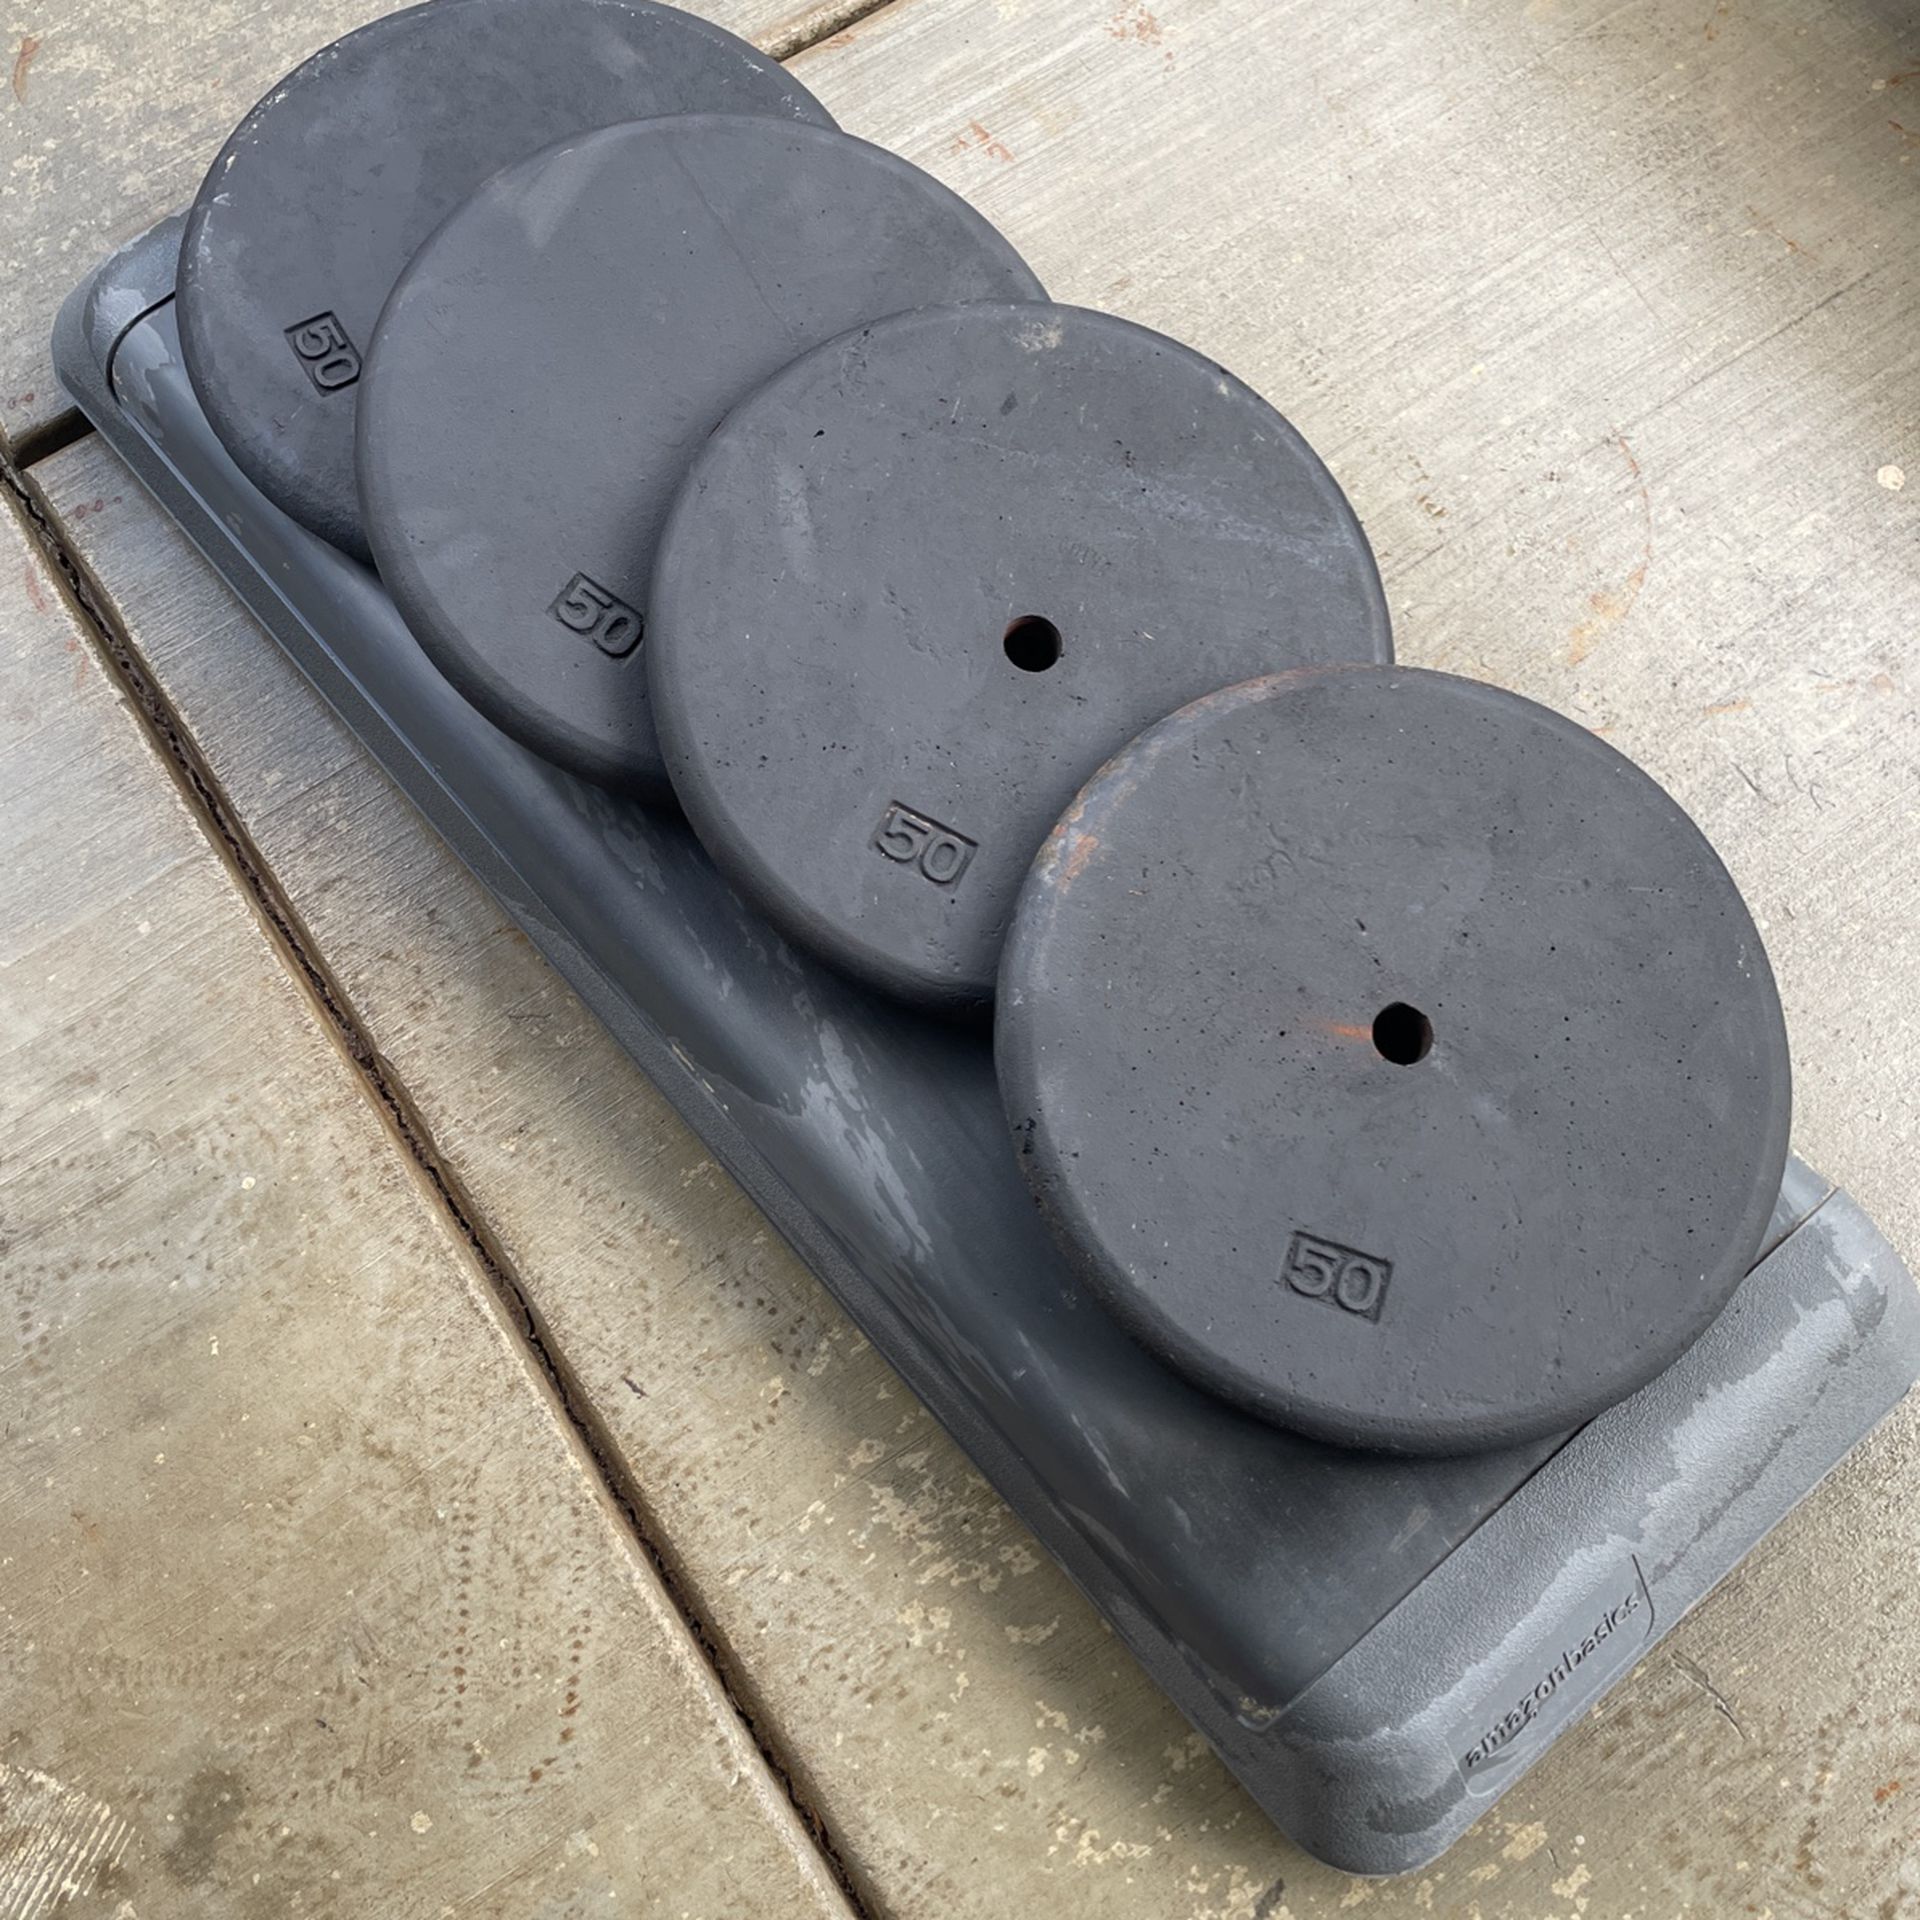 Four 50 Lbs Weight Plates: 200 Lbs Total